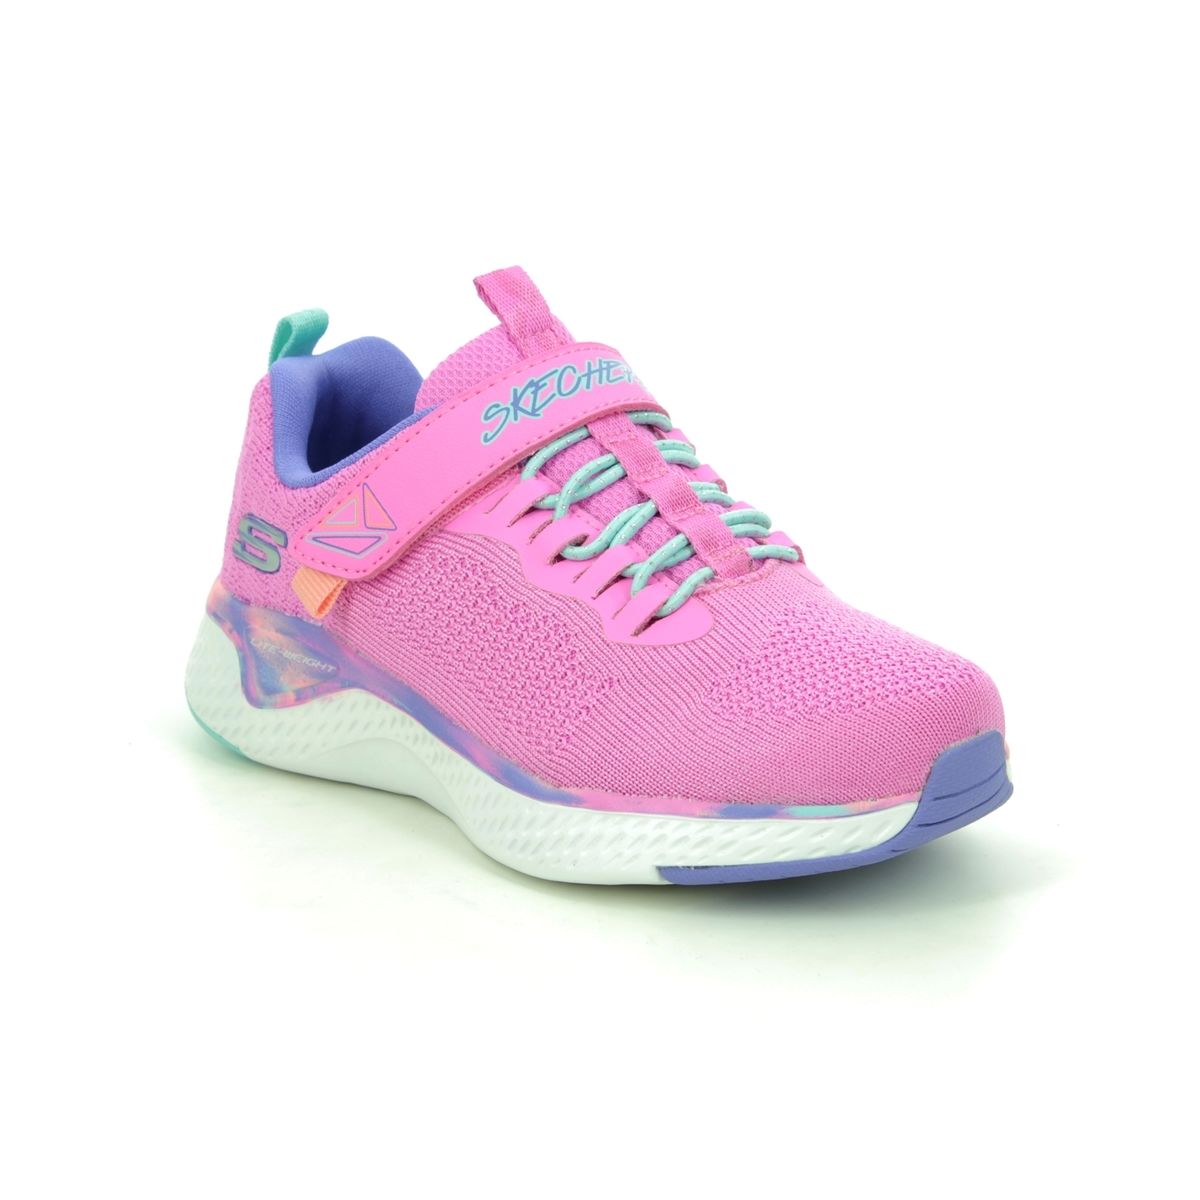 Skechers Solar Fuse Paint Power Pink Kids Girls Trainers 302041L In Size 32 In Plain Pink For kids